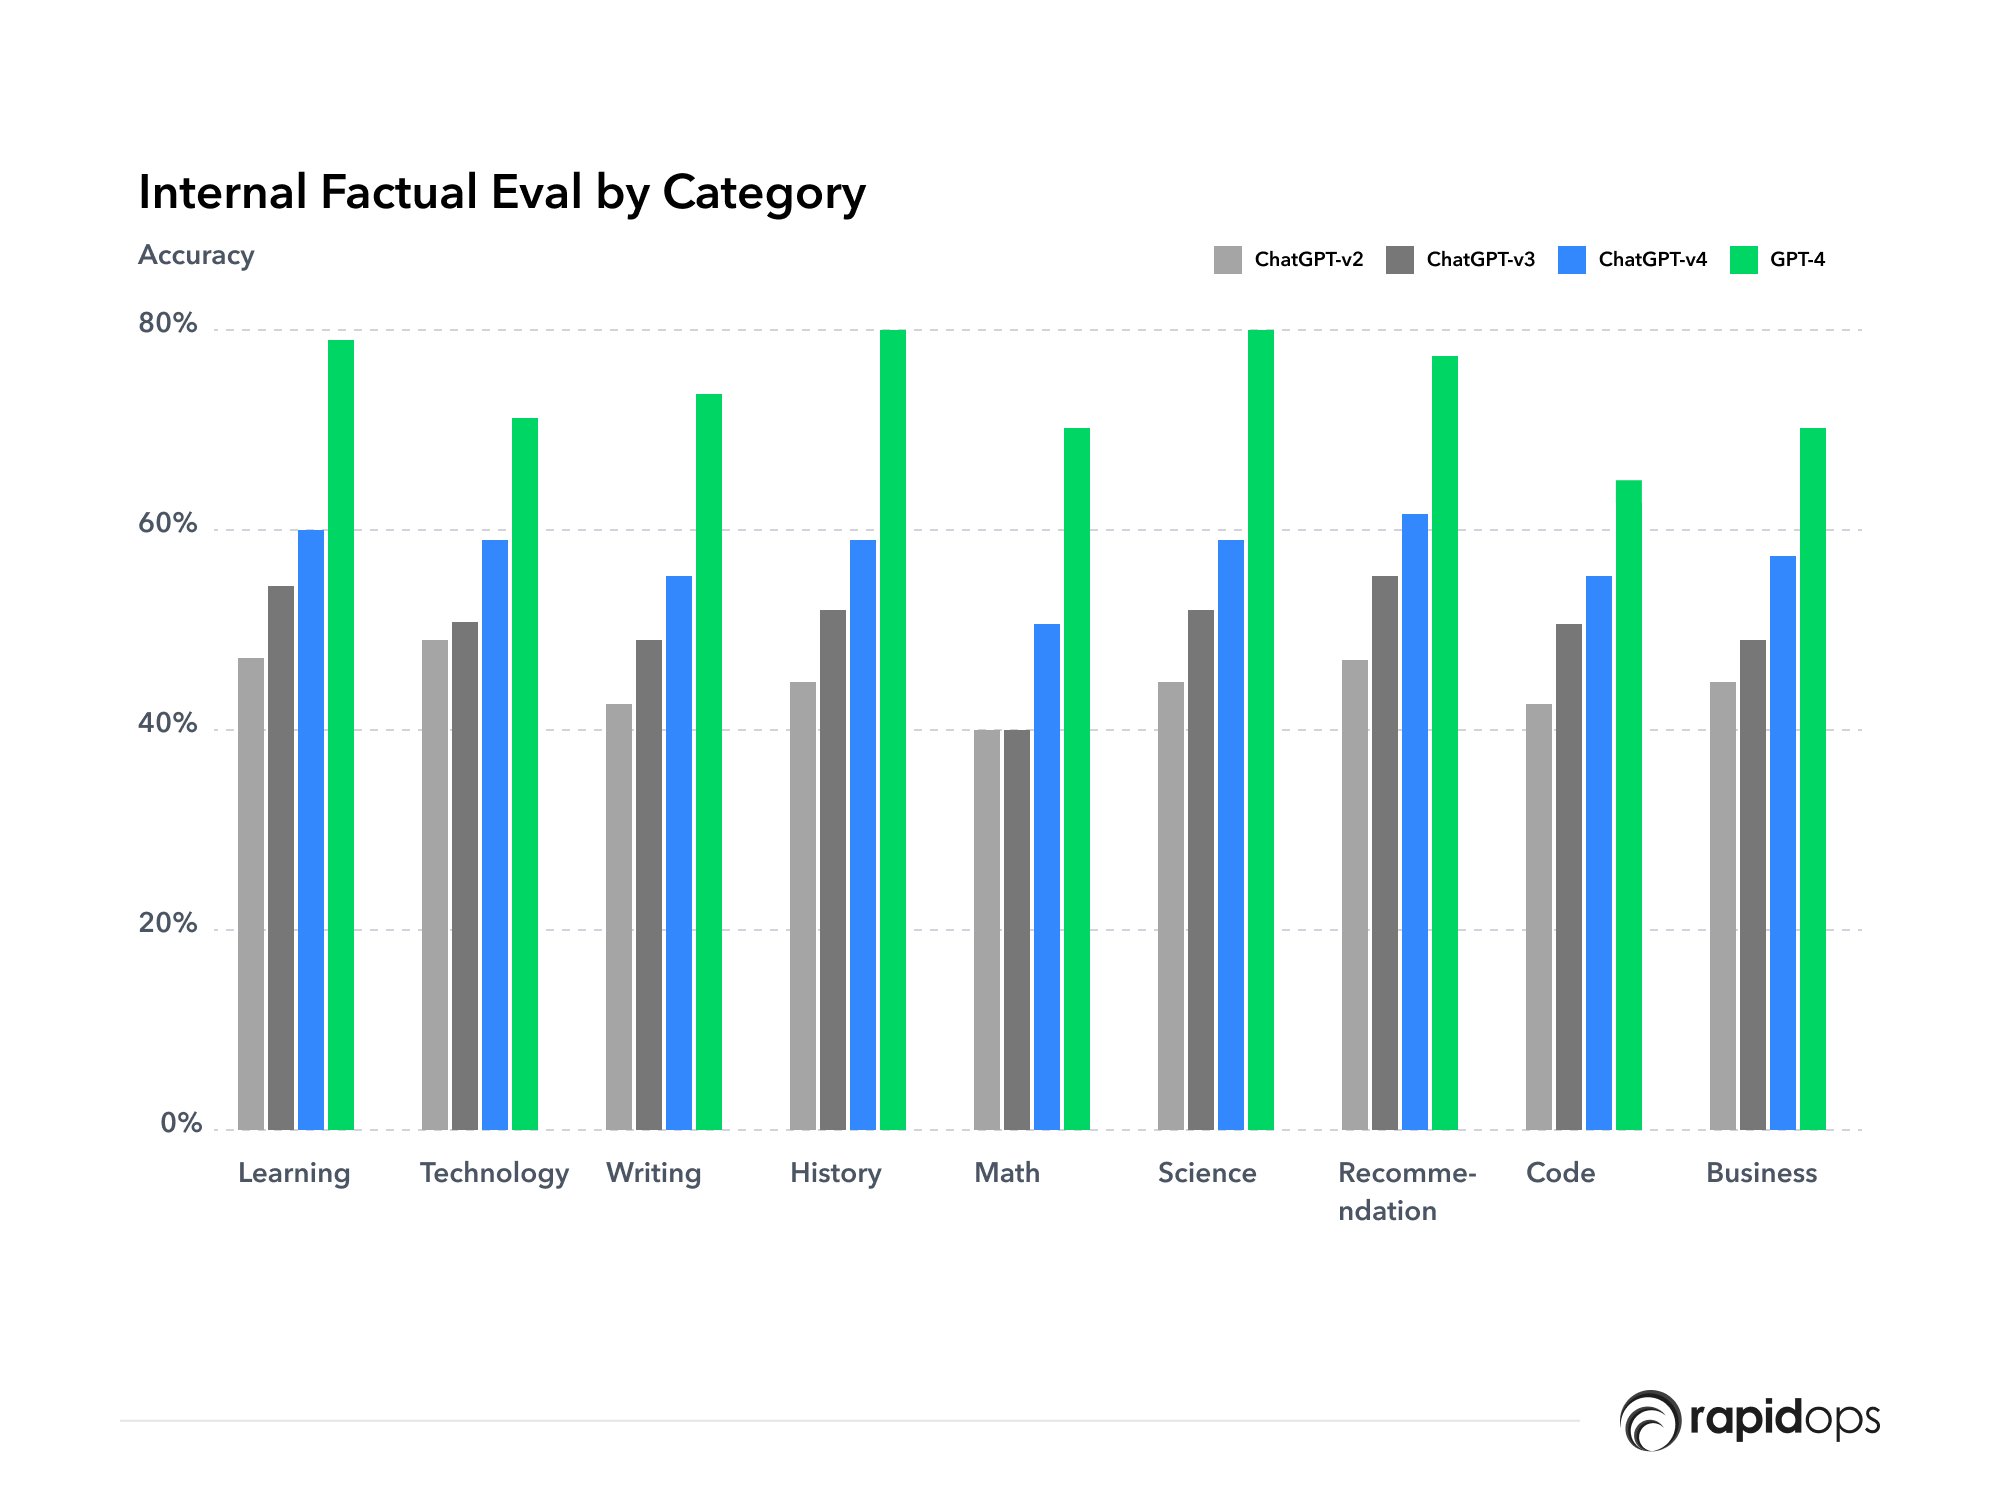 Internal factual evals by category